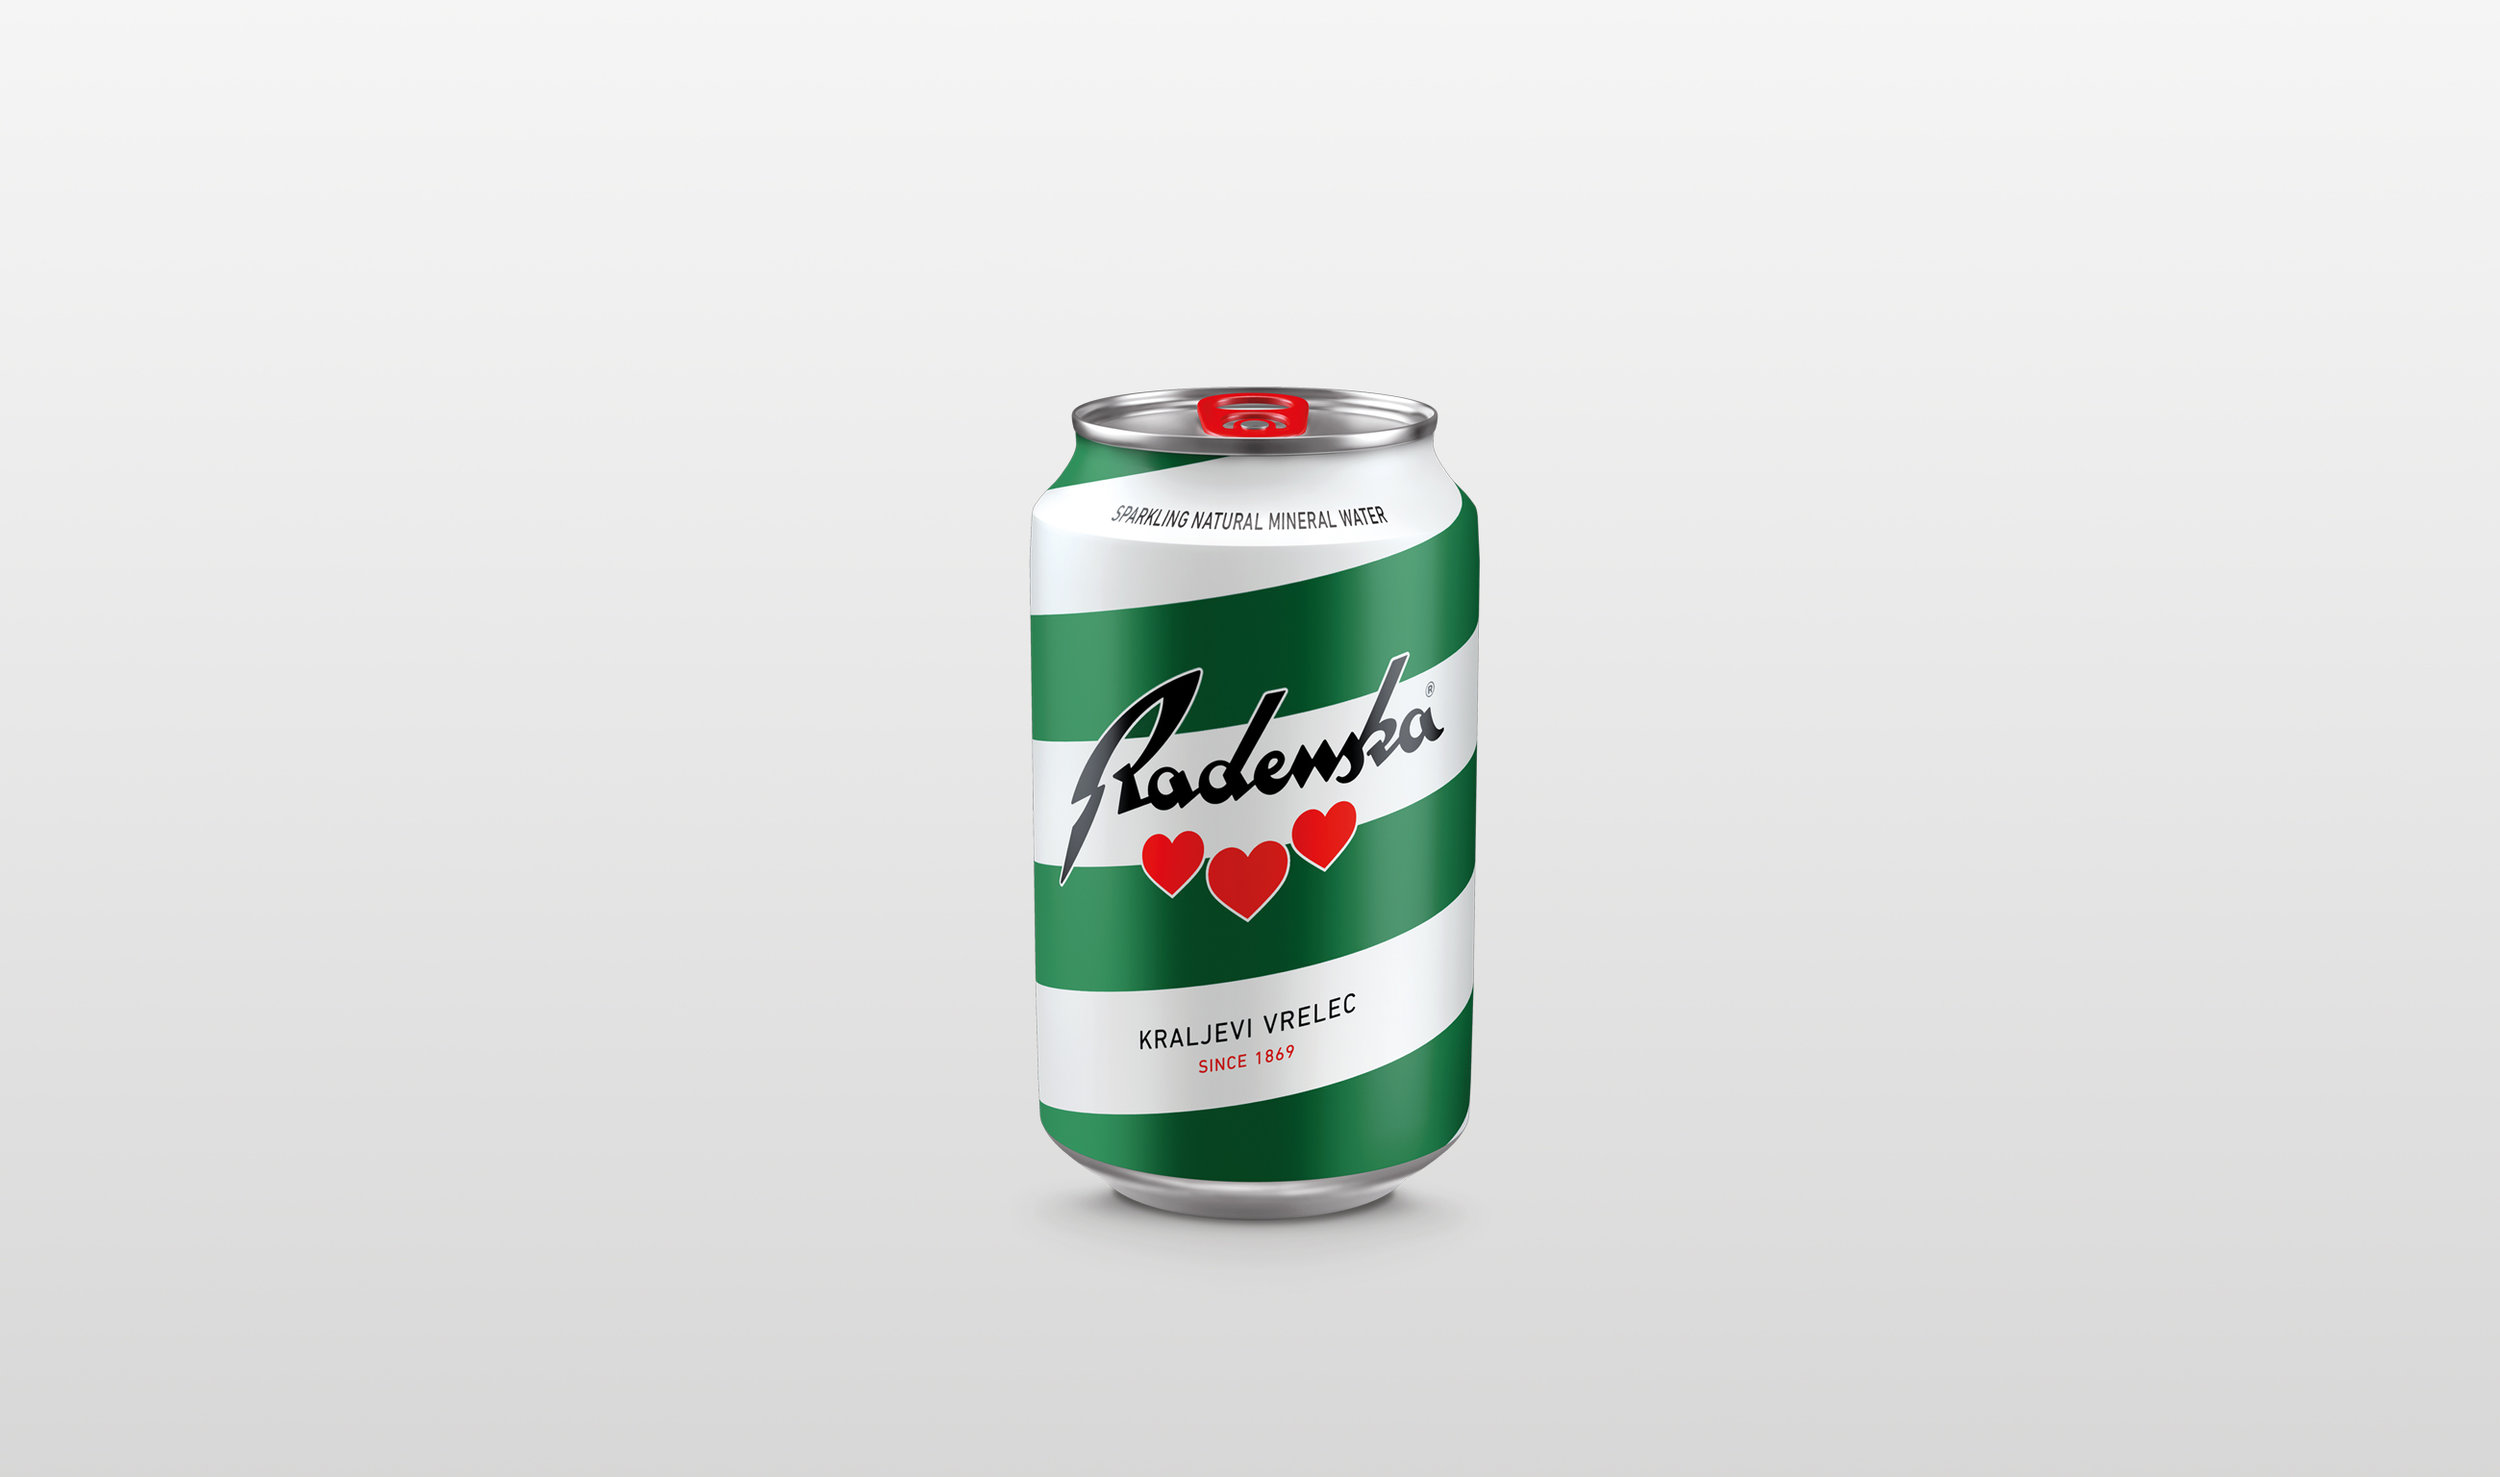 Sparkling Mineral Water Radenska in a Can